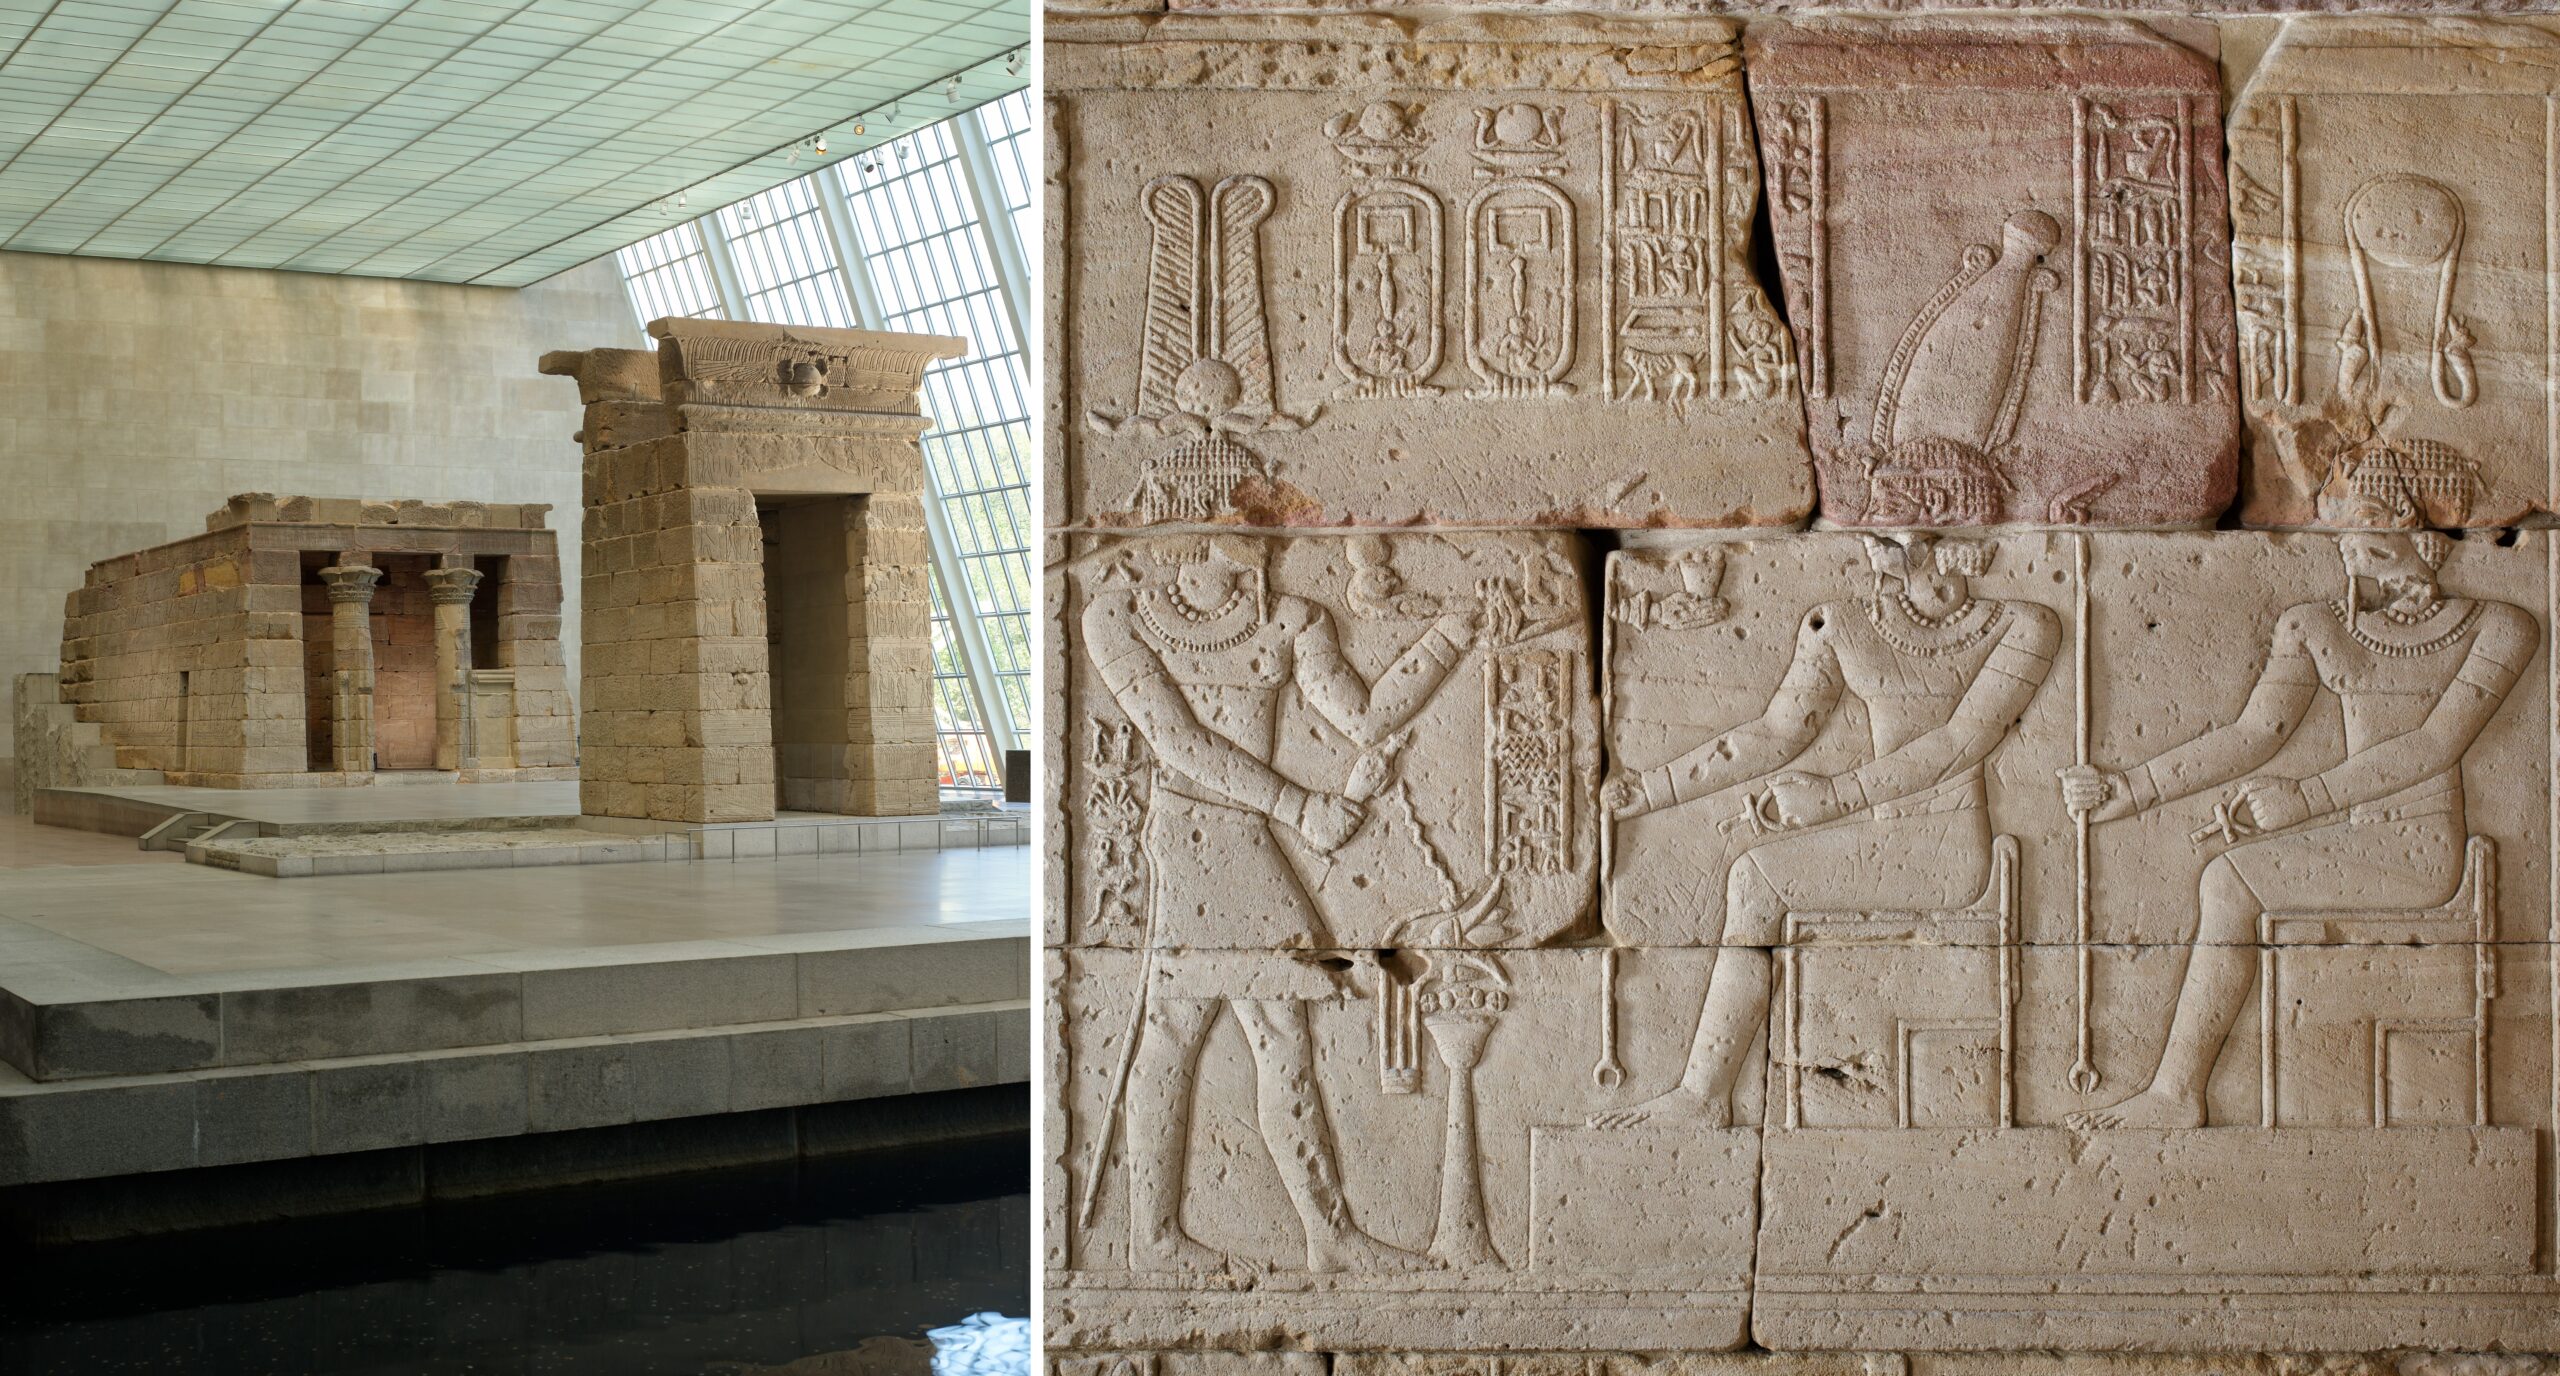 Left: The Temple of Dendur, from Egypt, Aeolian sandstone, 6.4 x 6.4 x 12.5 m; right: vignette on the interior south wall of the porch showing Augustus (left) burning incense and pouring a libation in front of the figures of Pedesi and Pihor (The Metropolitan Museum of Art, New York)